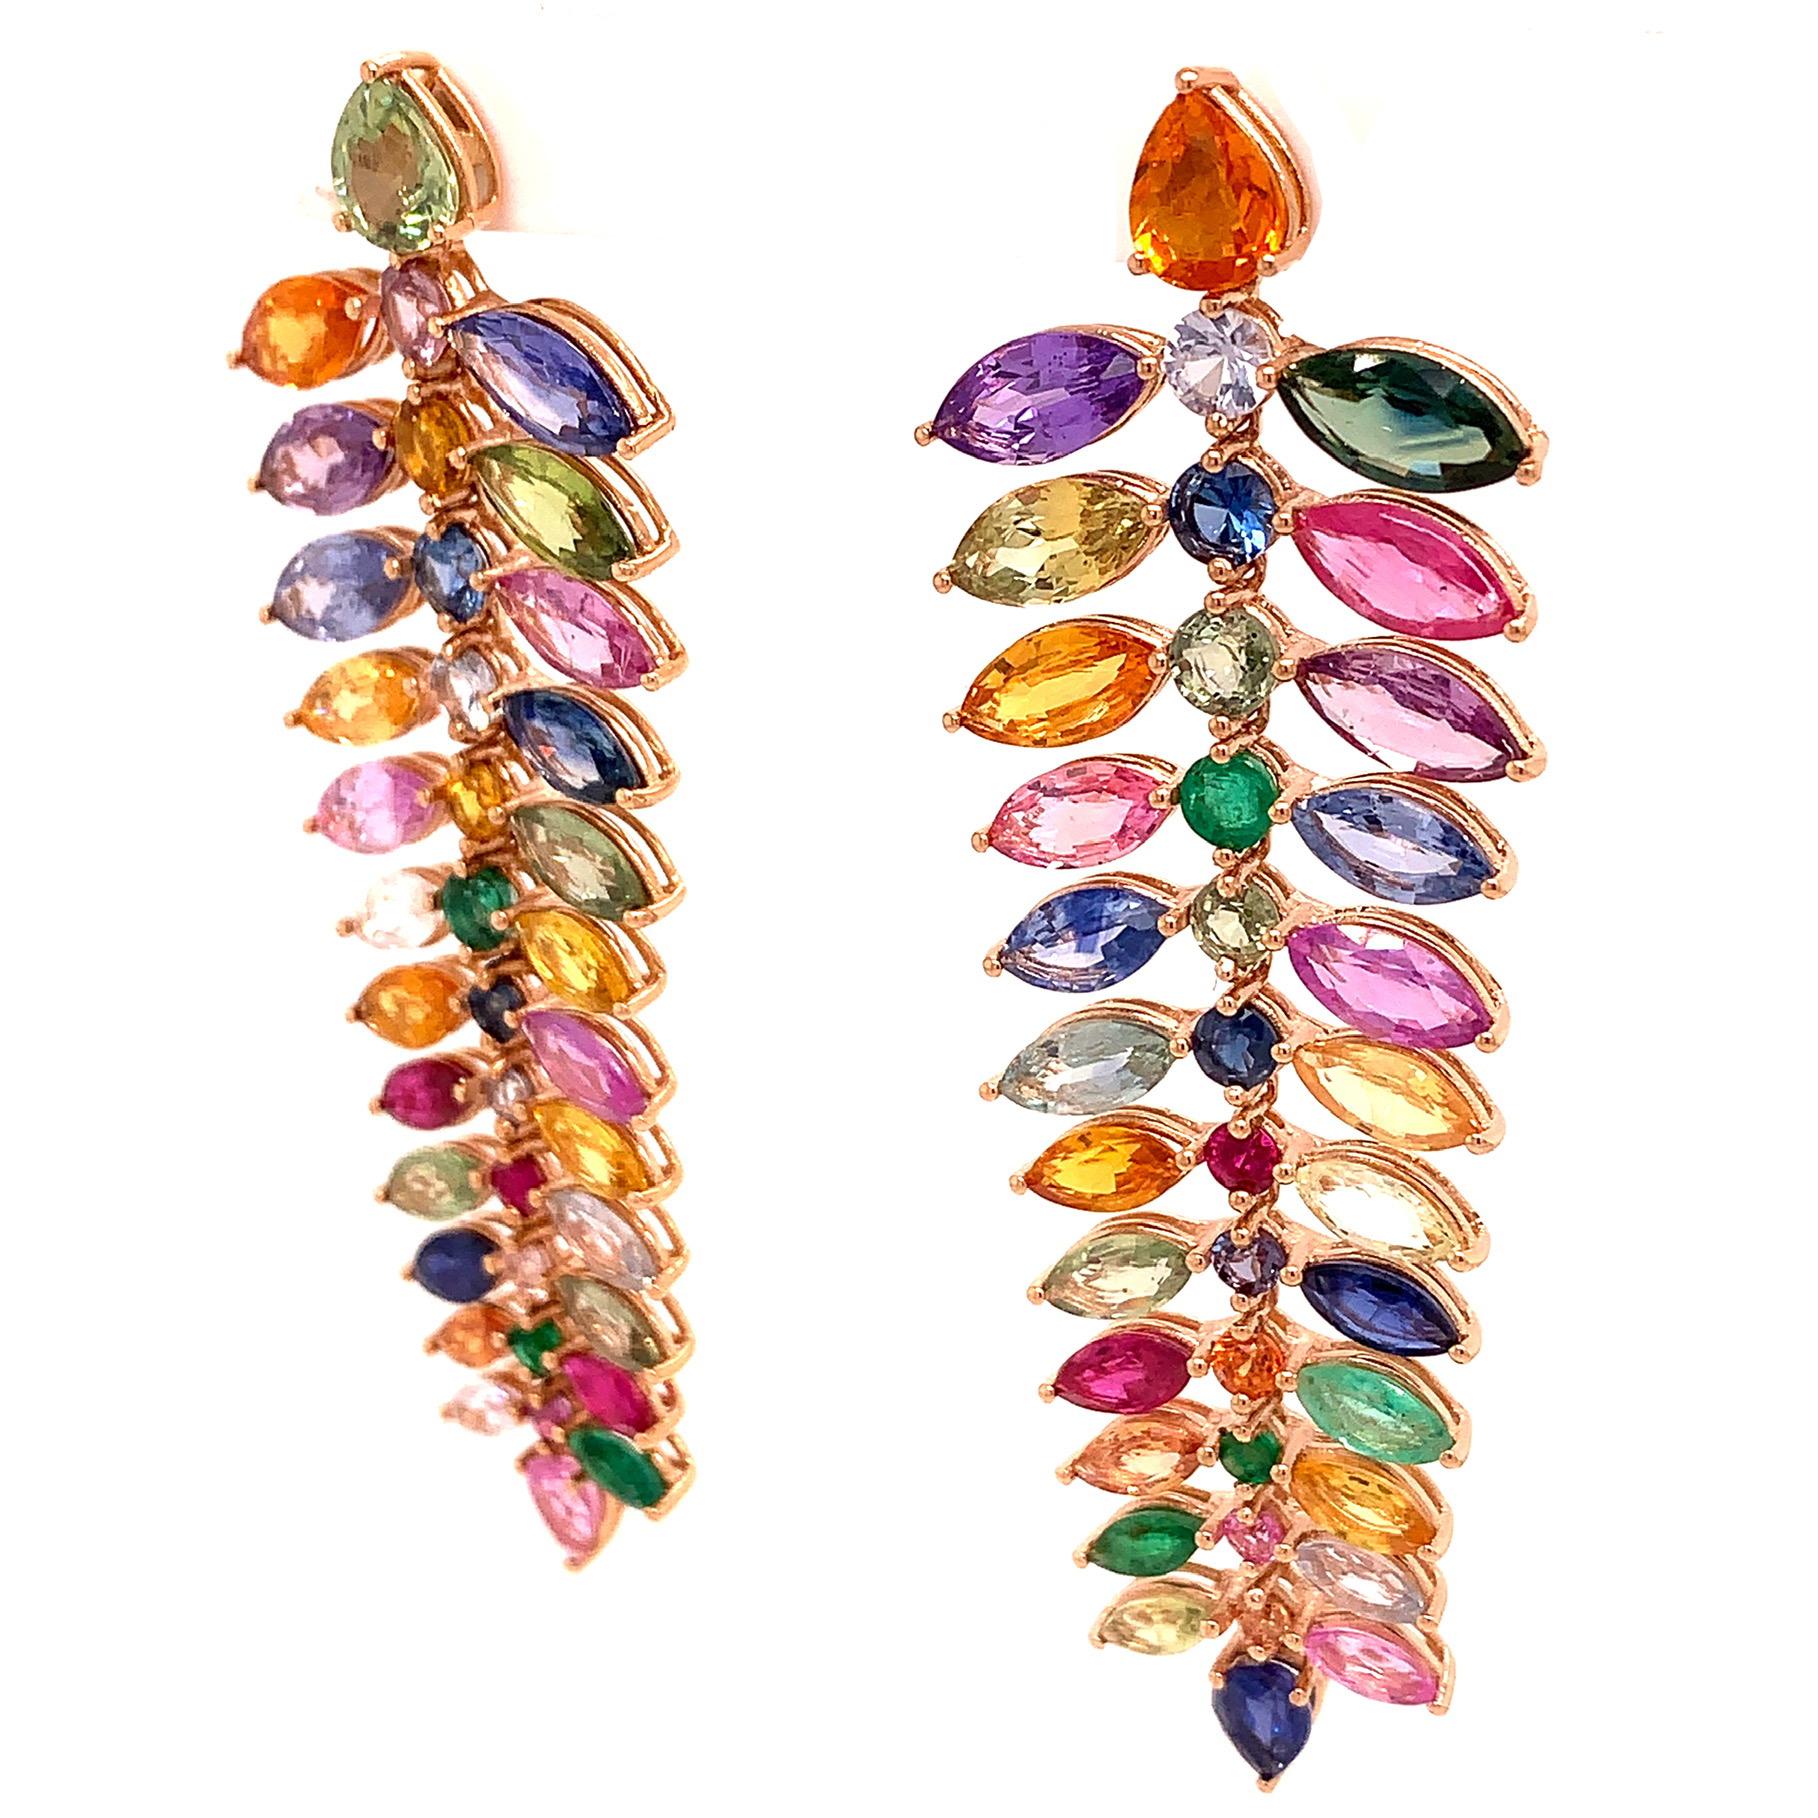 Play of Colors Collection

Emerald and Muticolor Sapphire chandelier earrings set in 18K rose gold. These earrings have movement they are not stiff. 

Emerald: 0.89ct total weight.
Sapphire: 21.76ct total weight.
